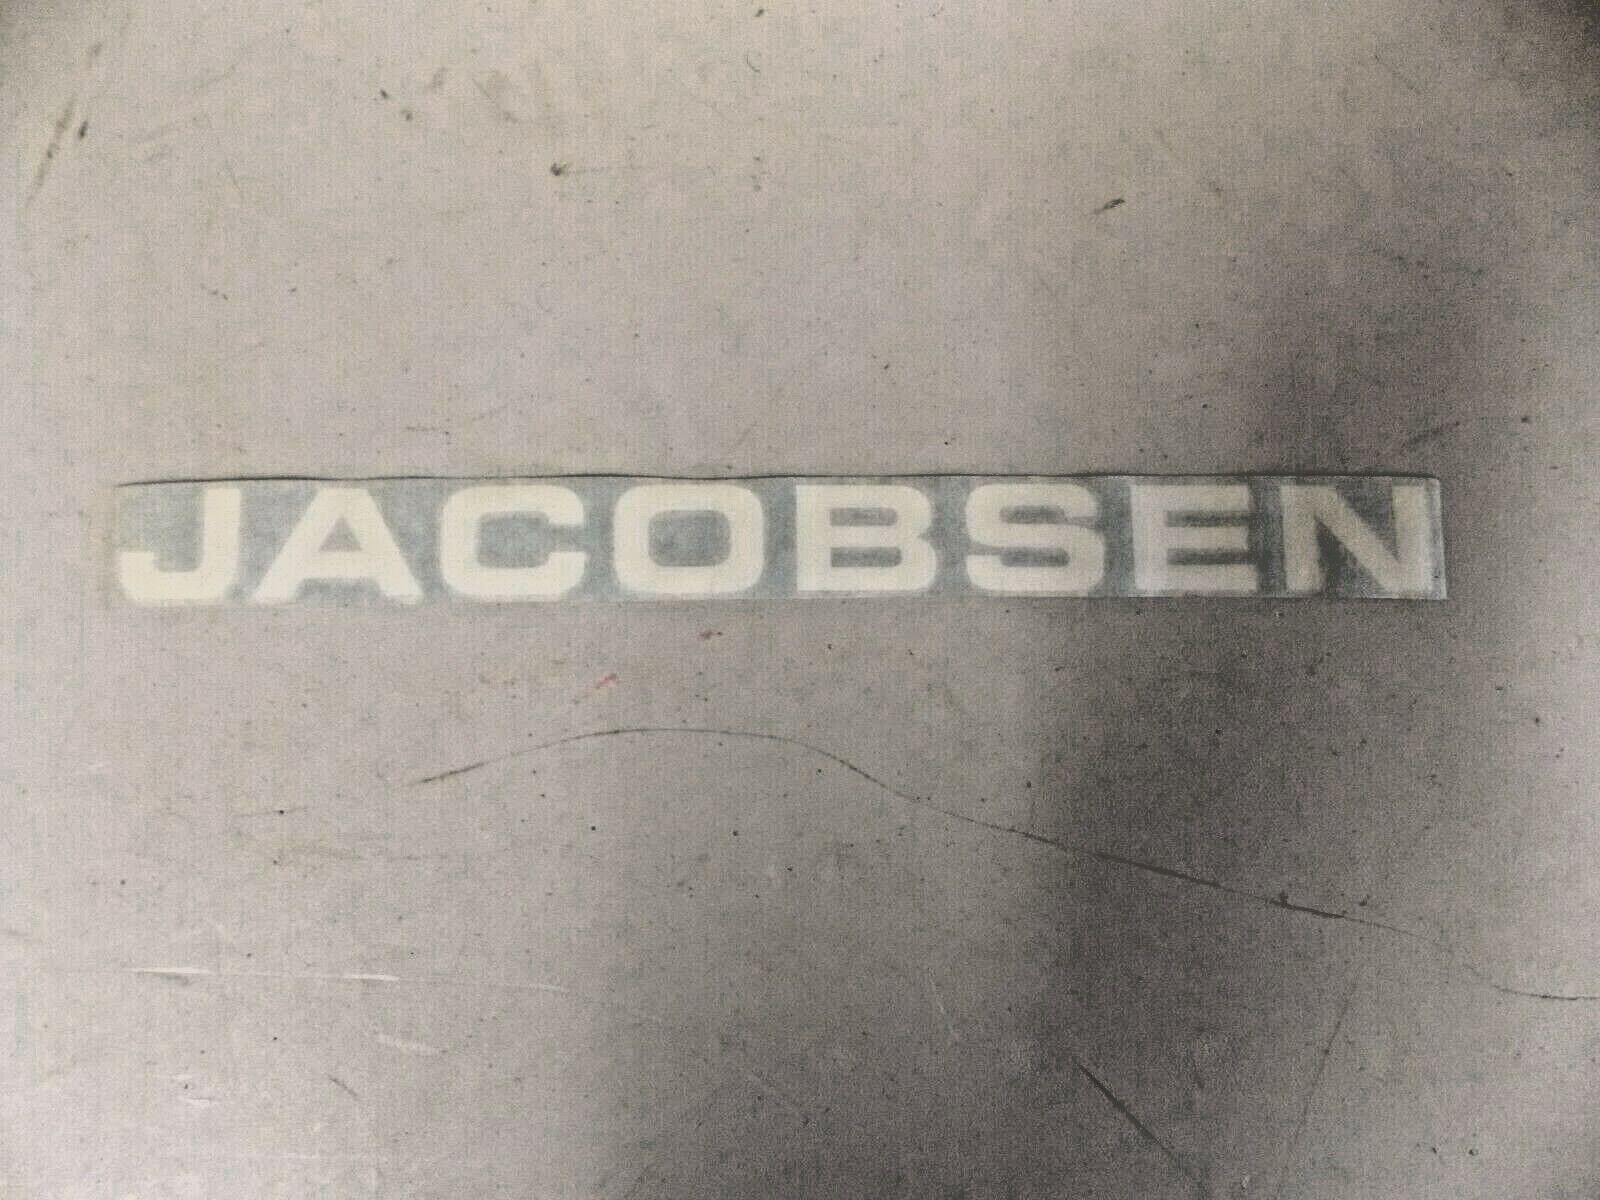 Jacobsen Decal 12" X 1" Fits Greens King Iv Mowers And Attachments & Mower Decks